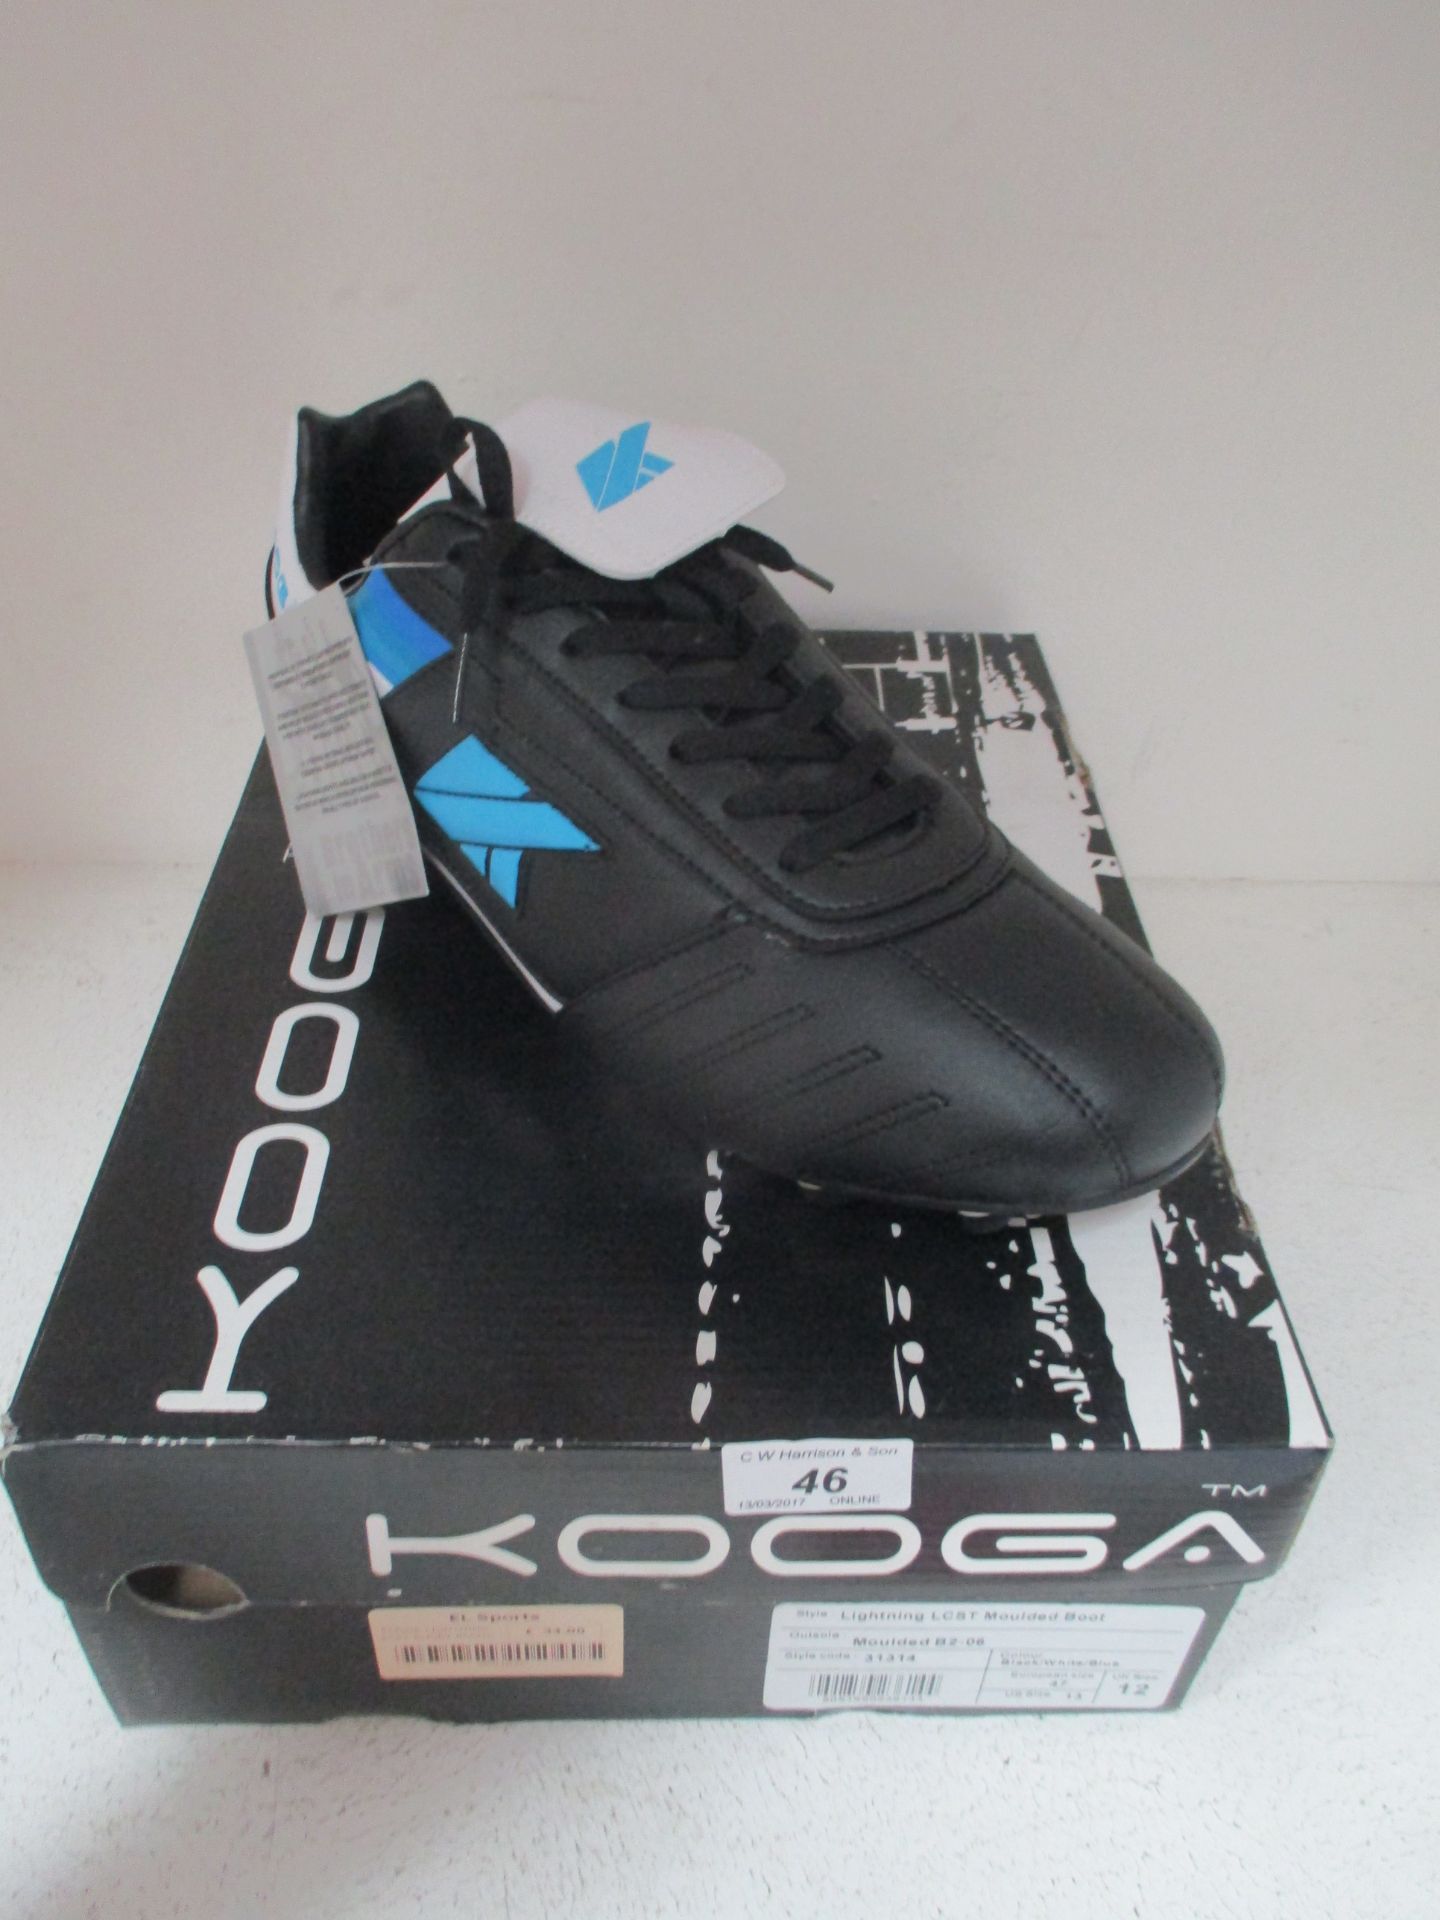 A pair of Kooga lighting LCST moulded B2-06 rugby boots size 12